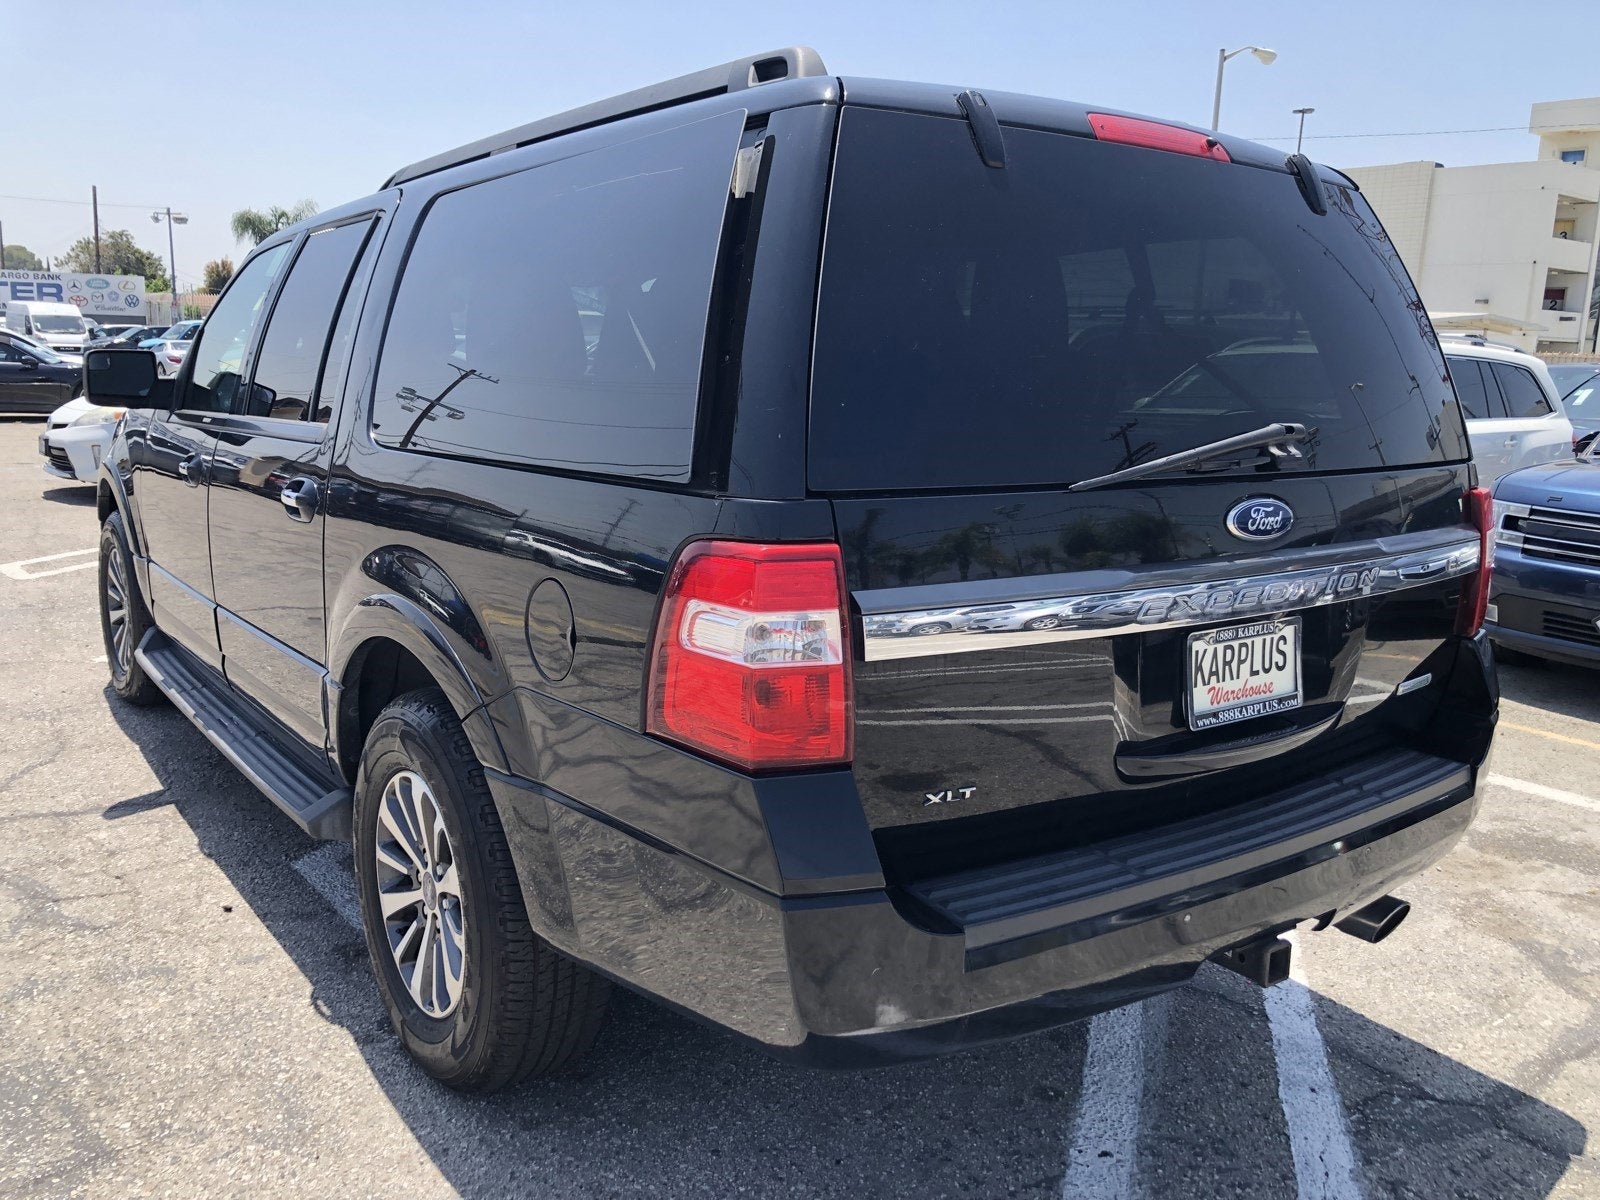 2016 Ford Expedition EL Base